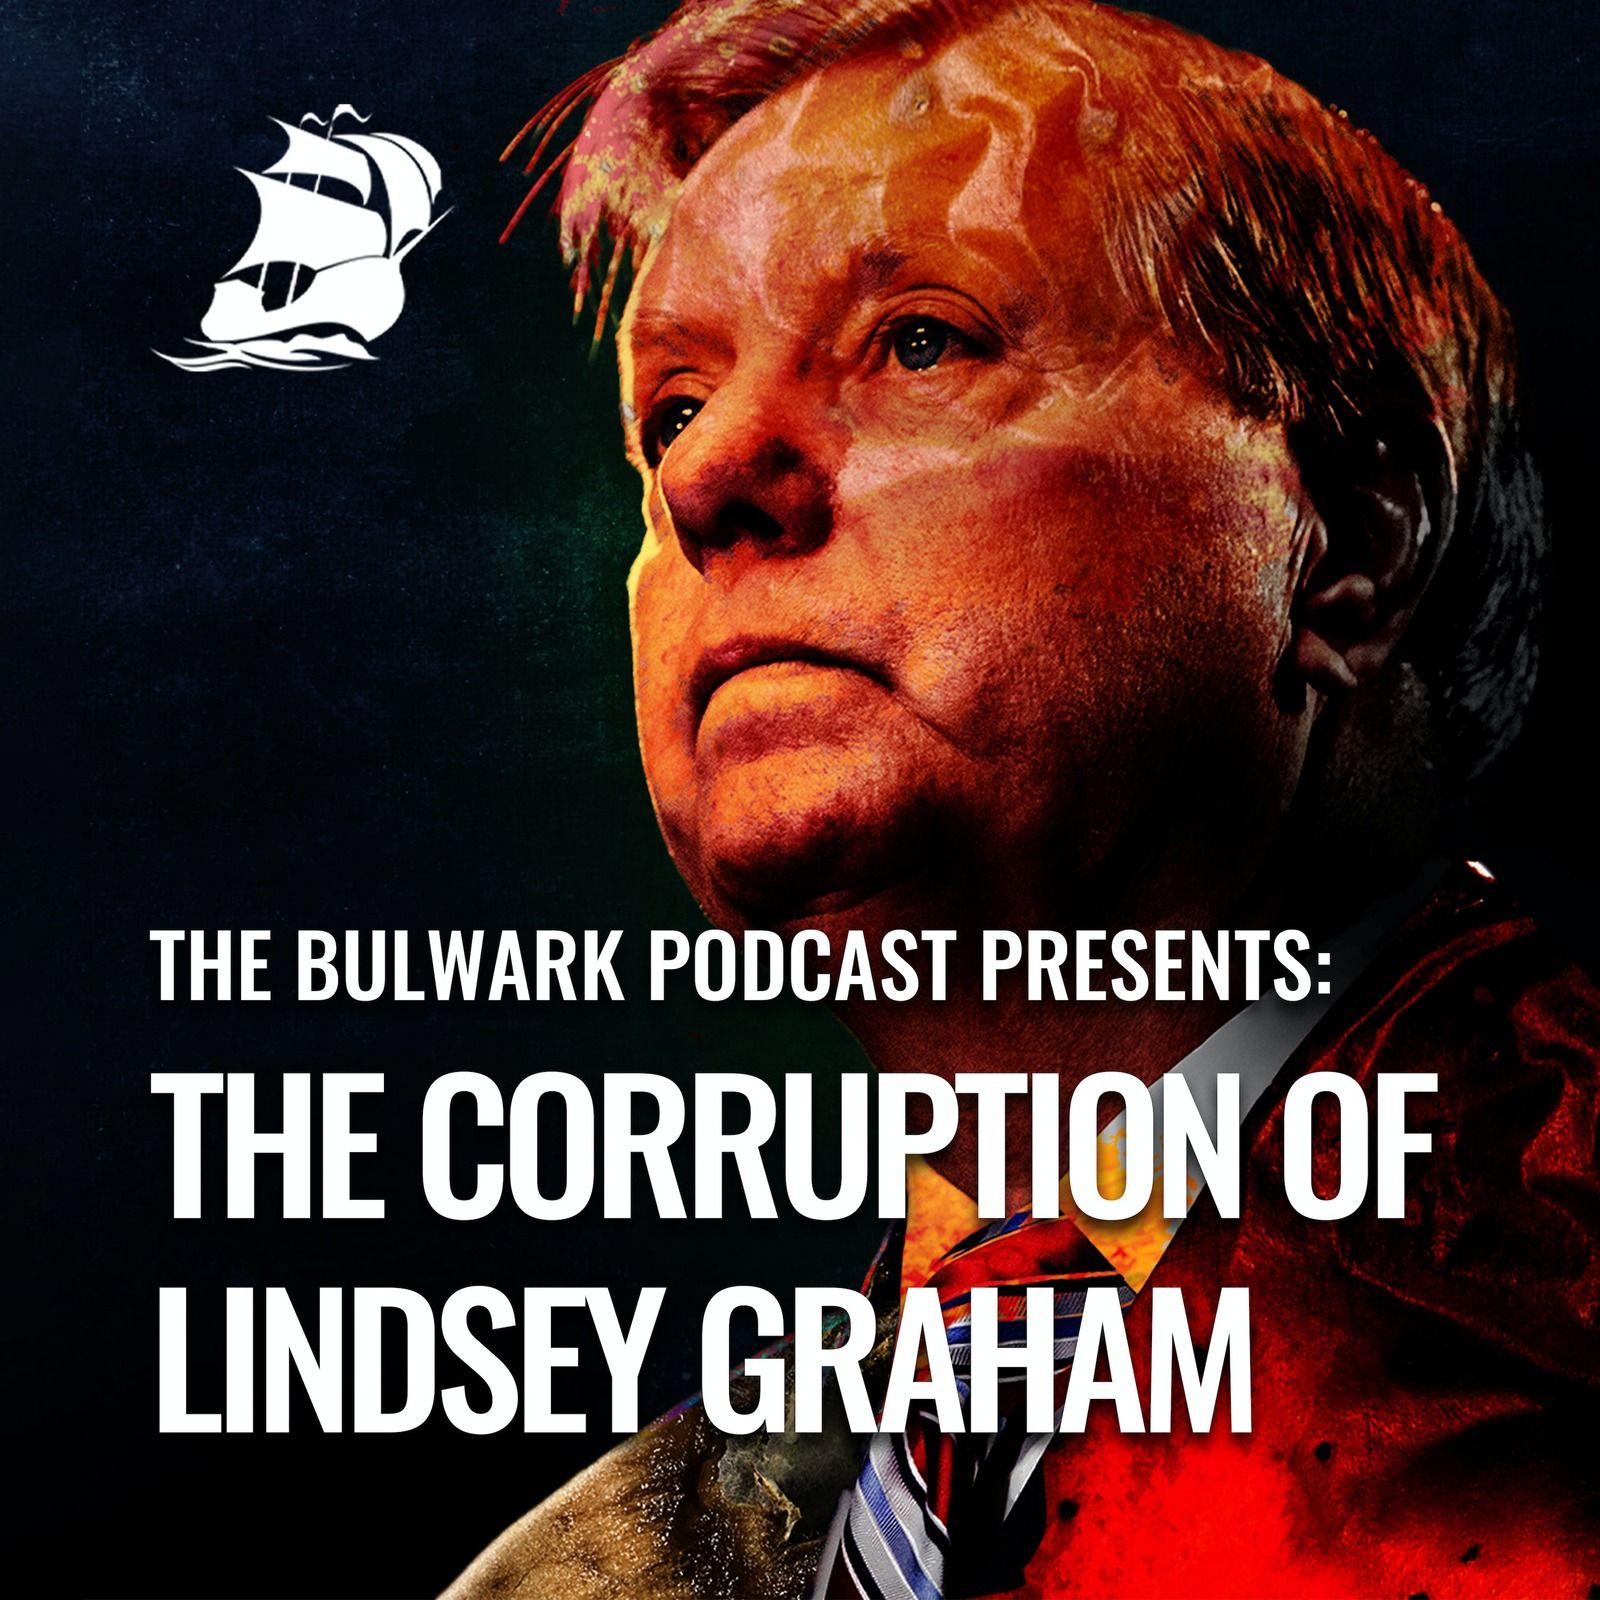 Ep. 1: The Corruption of Lindsey Graham  by The Bulwark Podcast